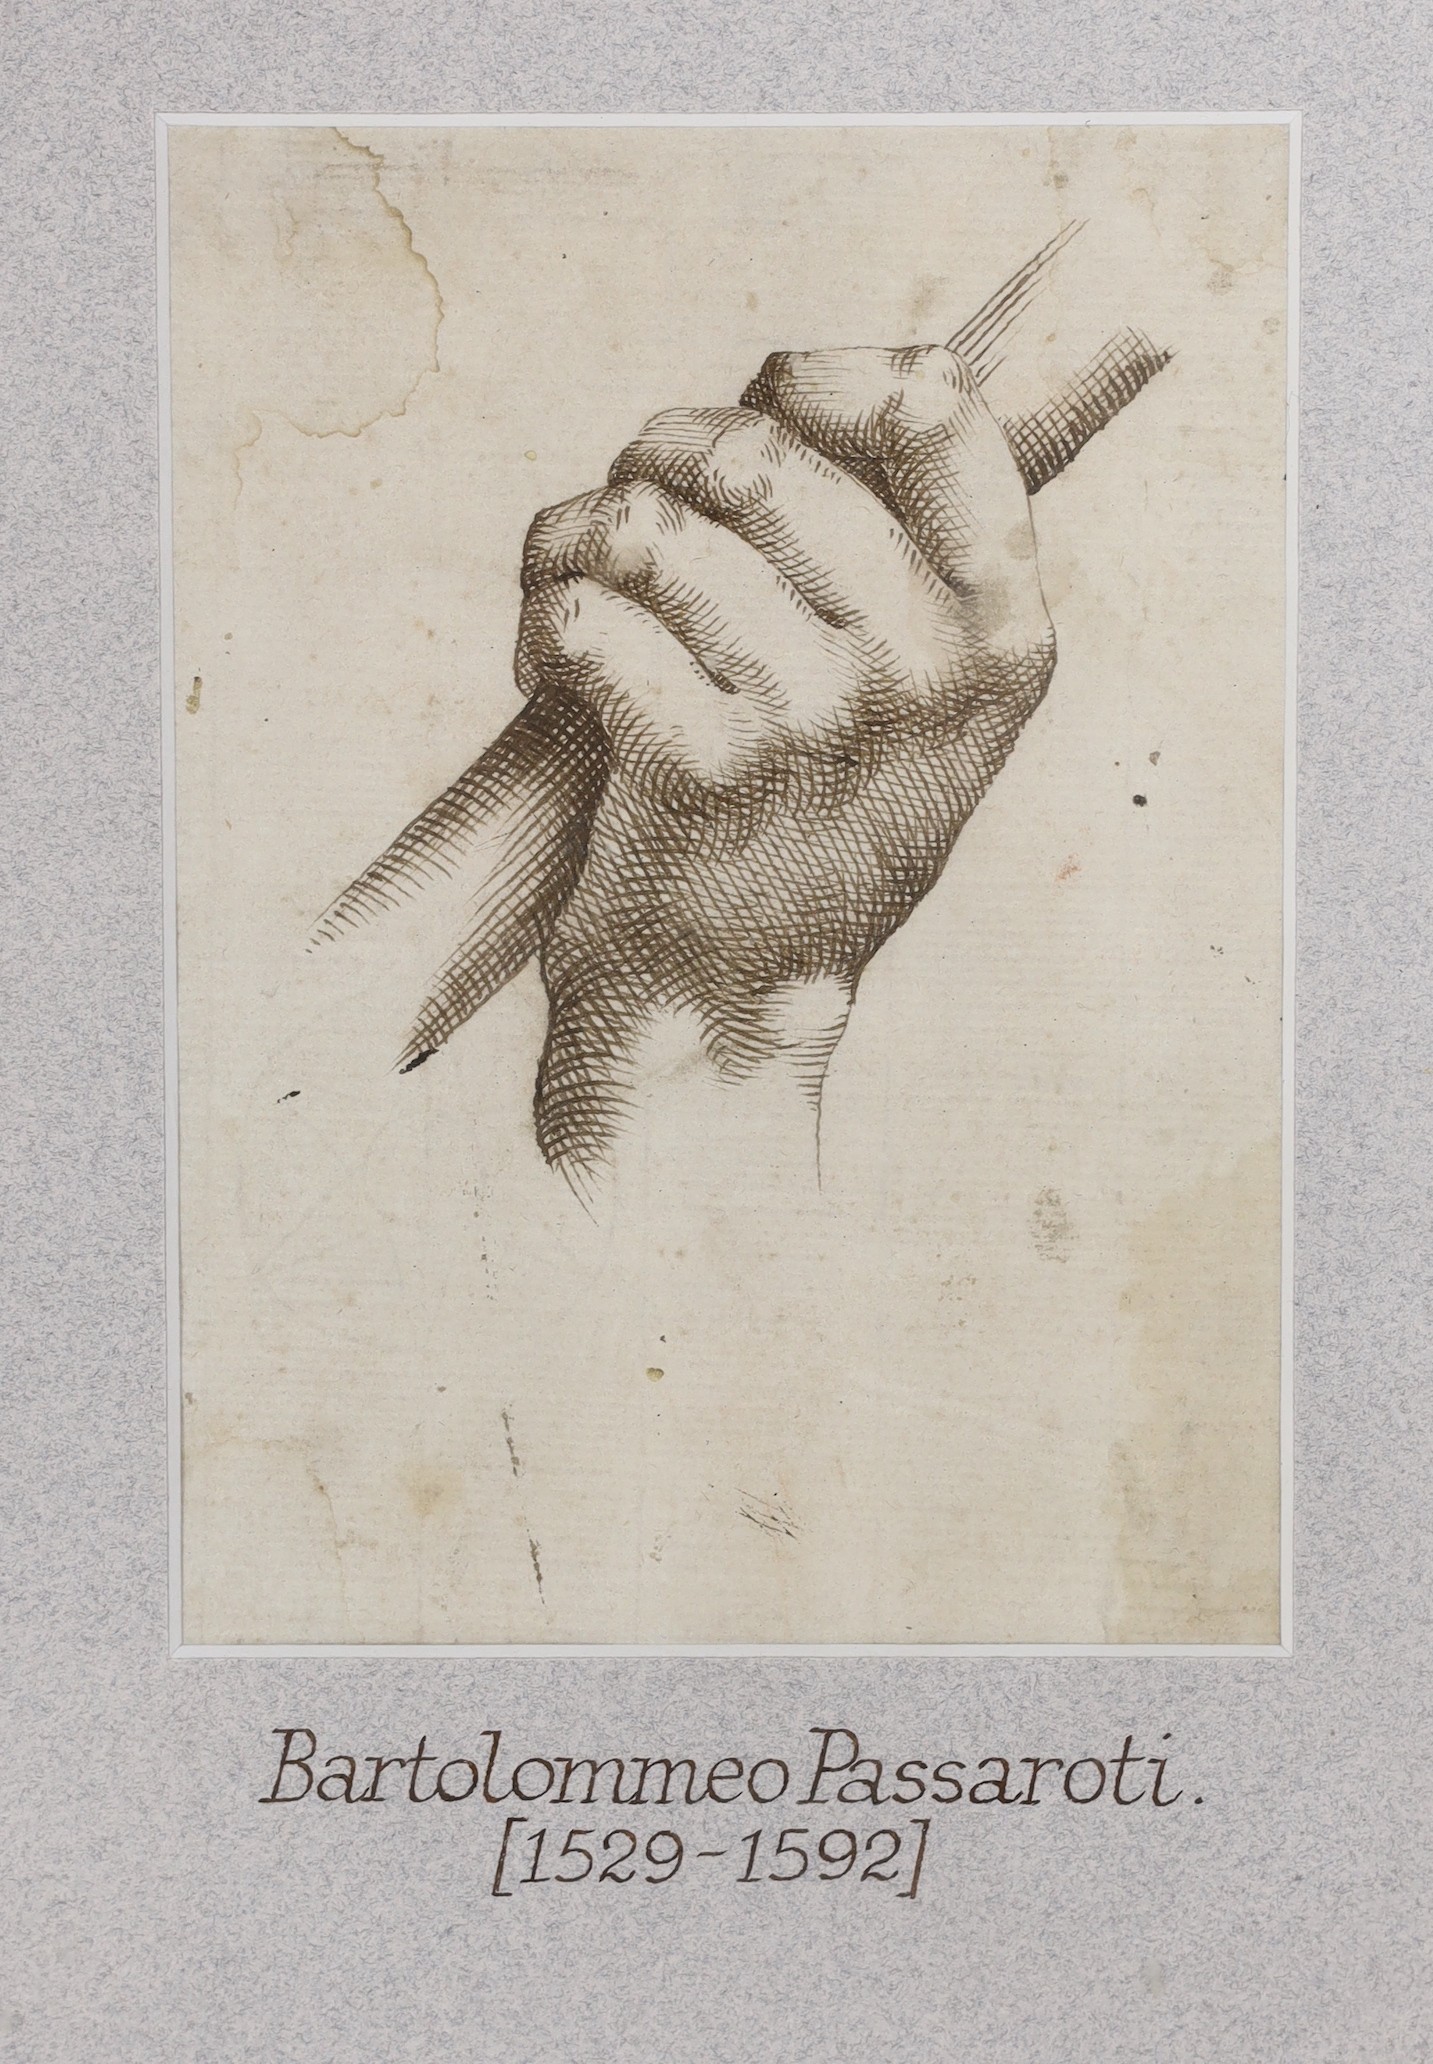 Attributed to Bartolommeo Passaroti (1529-1592), pen and ink, Study of a hand clasping a staff, 16 x 12cm